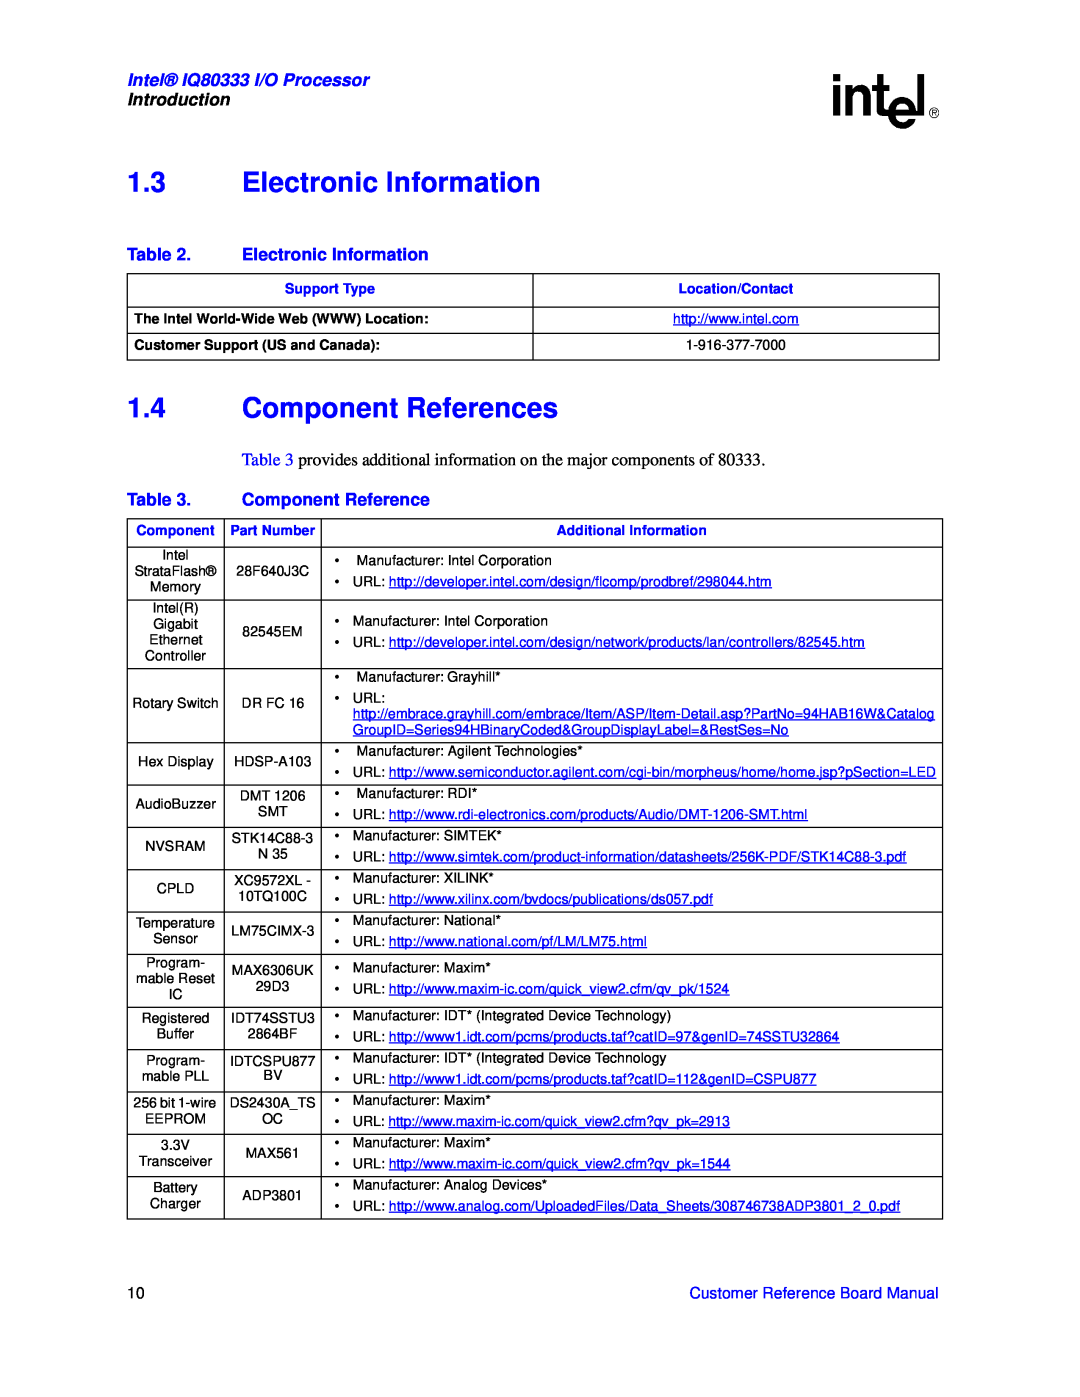 Intel manual 1.3Electronic Information, 1.4Component References, Introduction, Intel IQ80333 I/O Processor, Support Type 